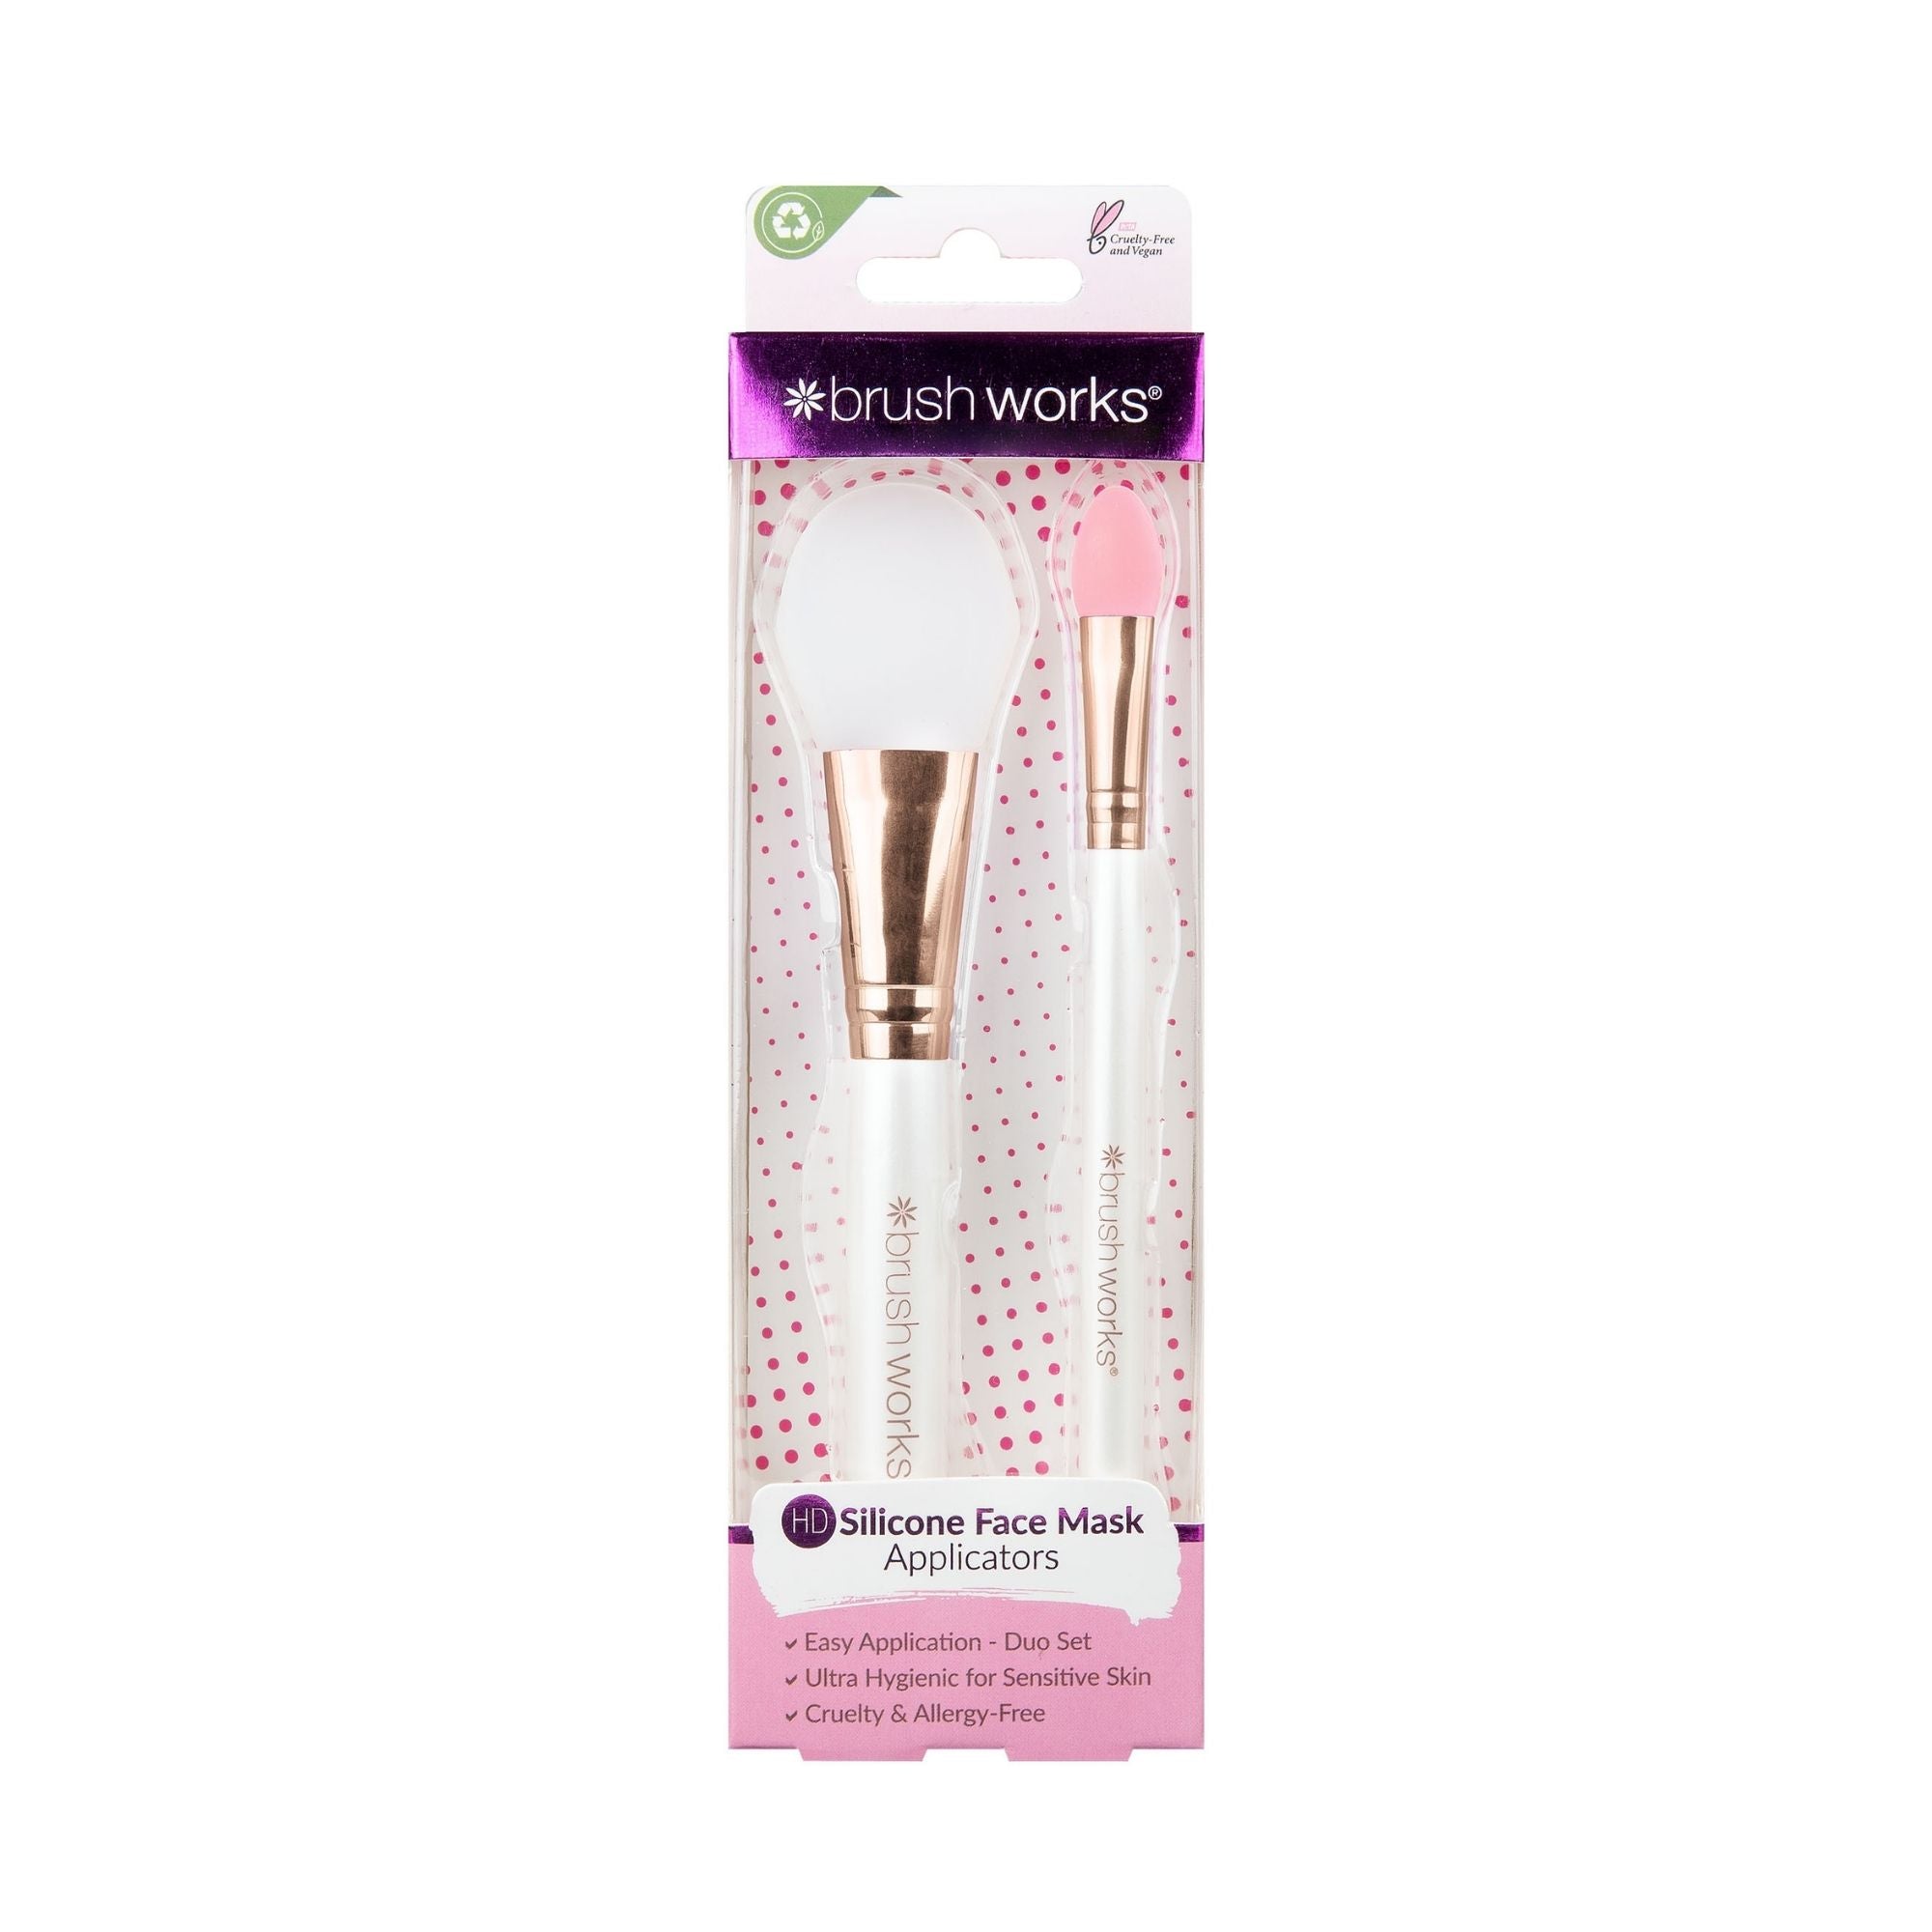 Brush Works HD Silicone Face Mask Applicators